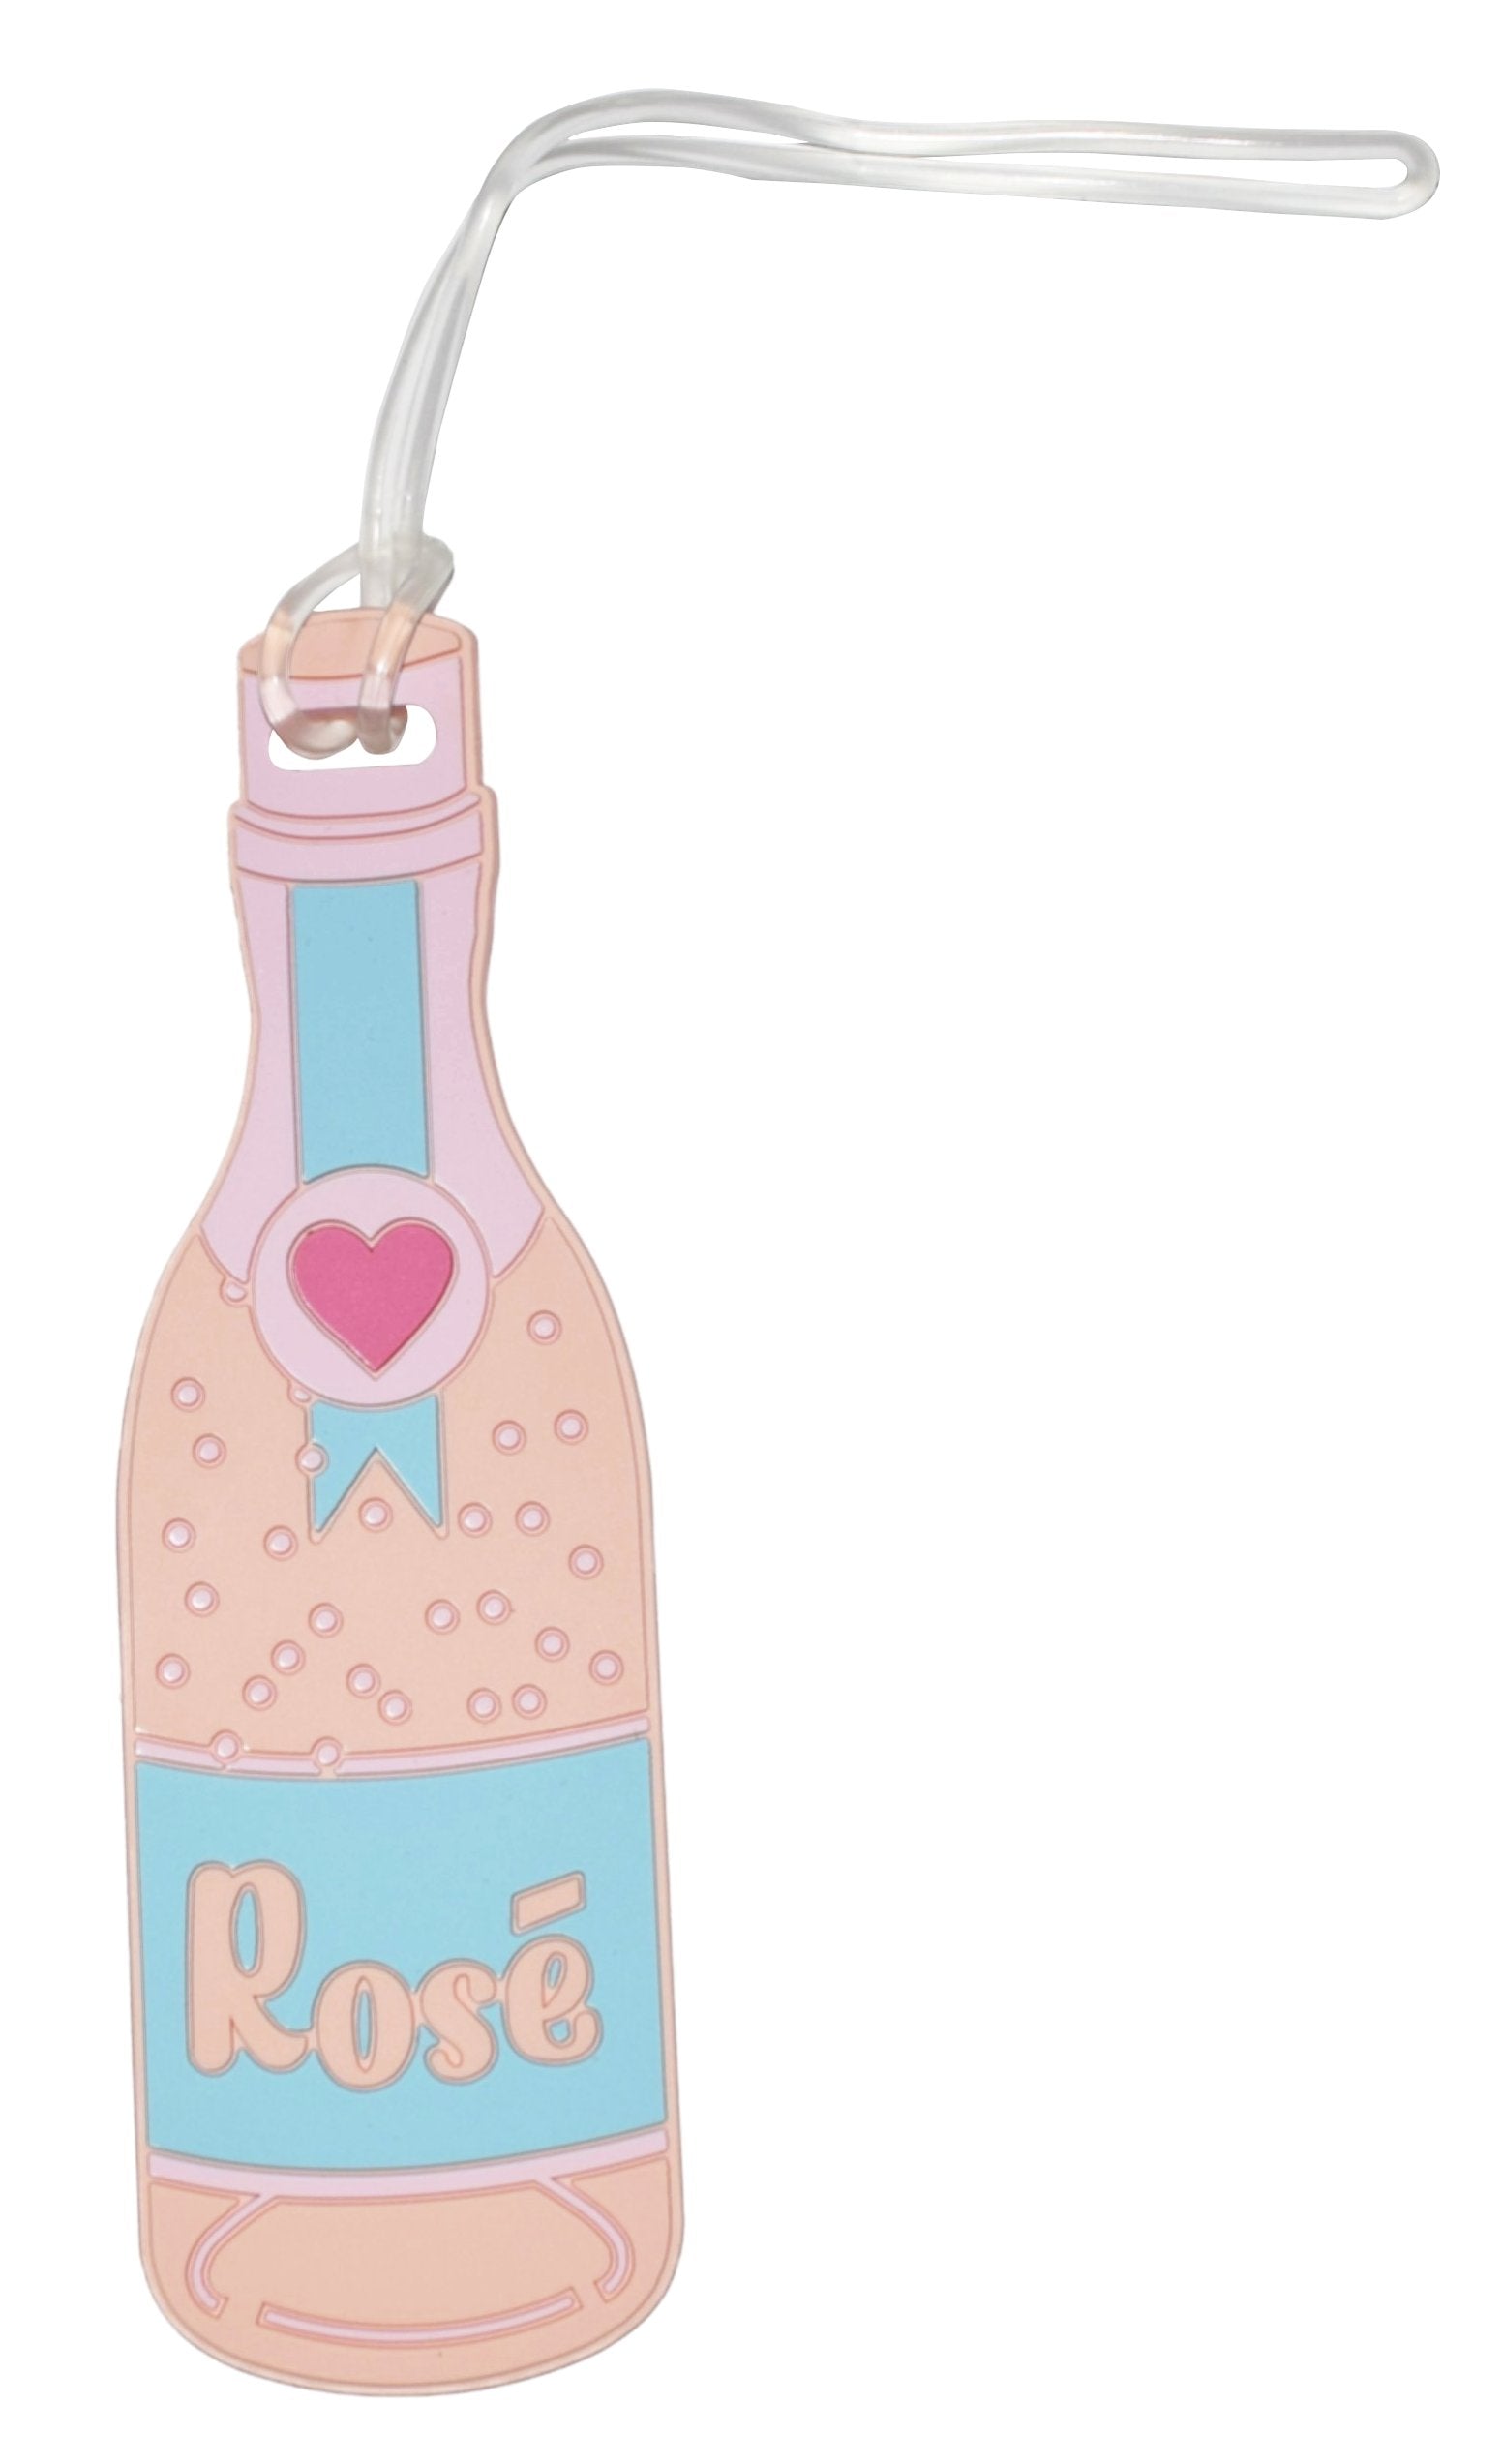 Silicone Luggage Tag Rose Champagne Bottle